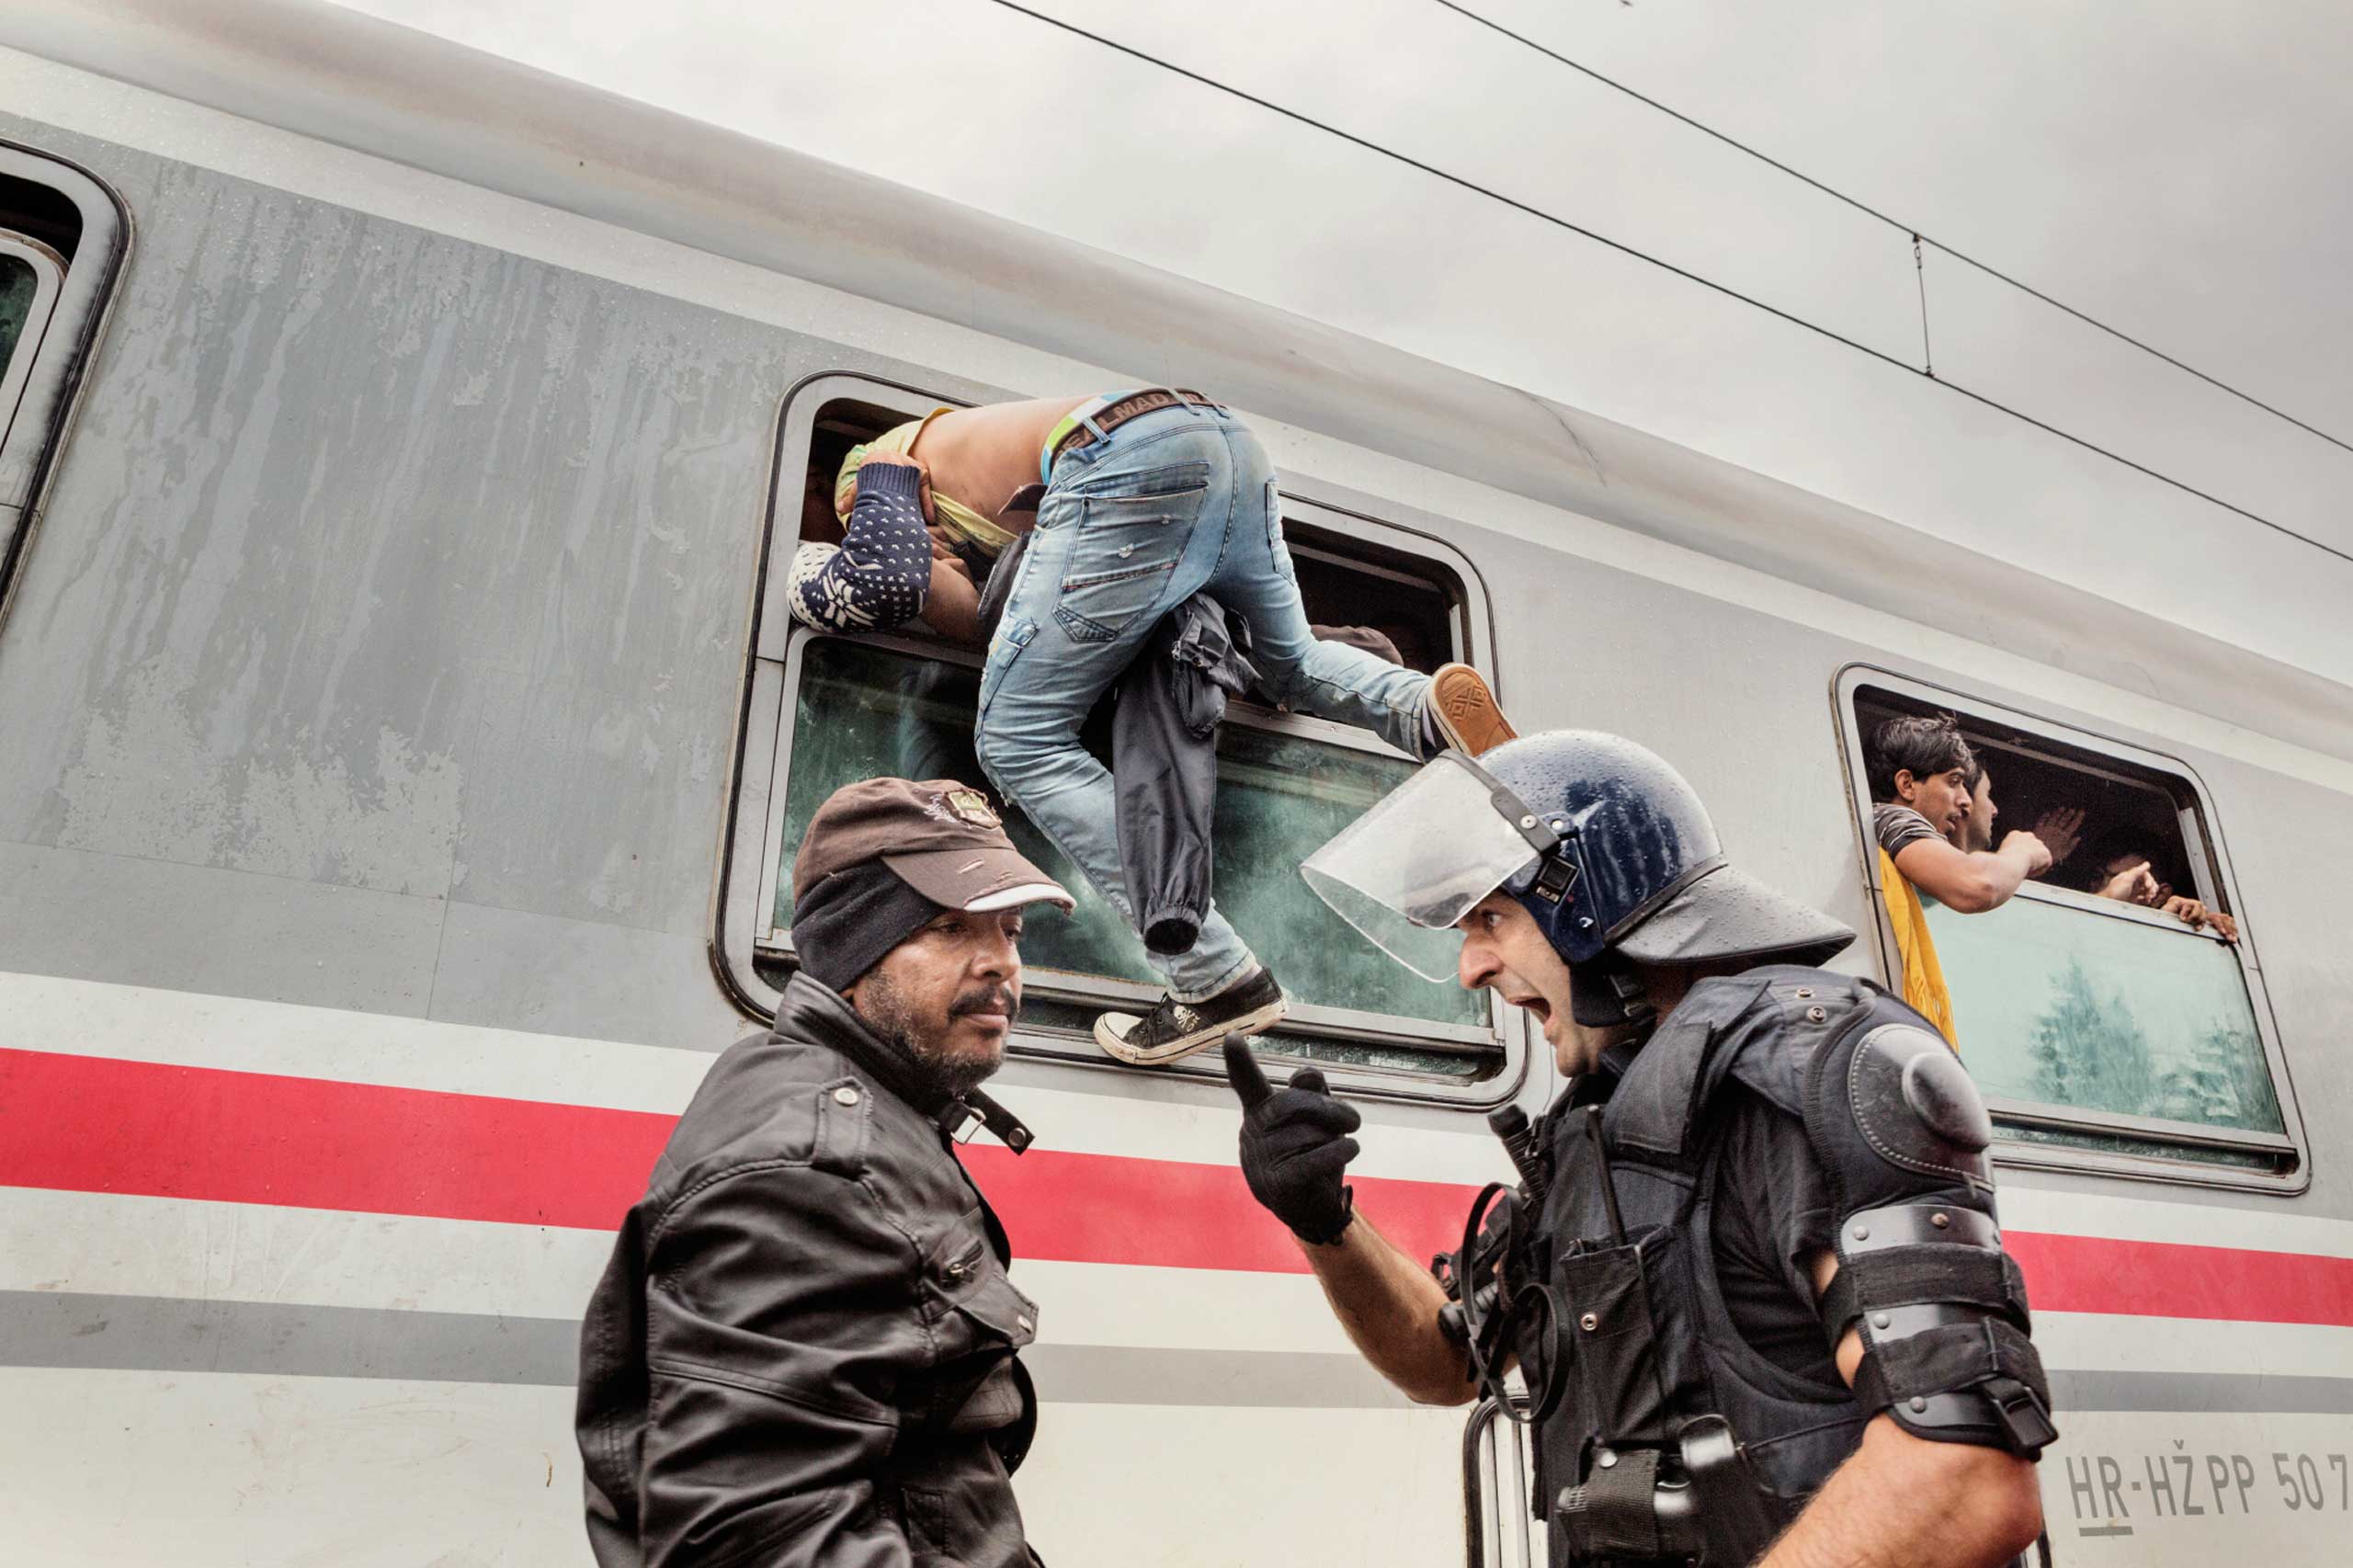 A police officer screamed at a migrant as he attempted to board a train in Tovarnik, Croatia, Sept. 20, 2015. (Alessandro Penso)